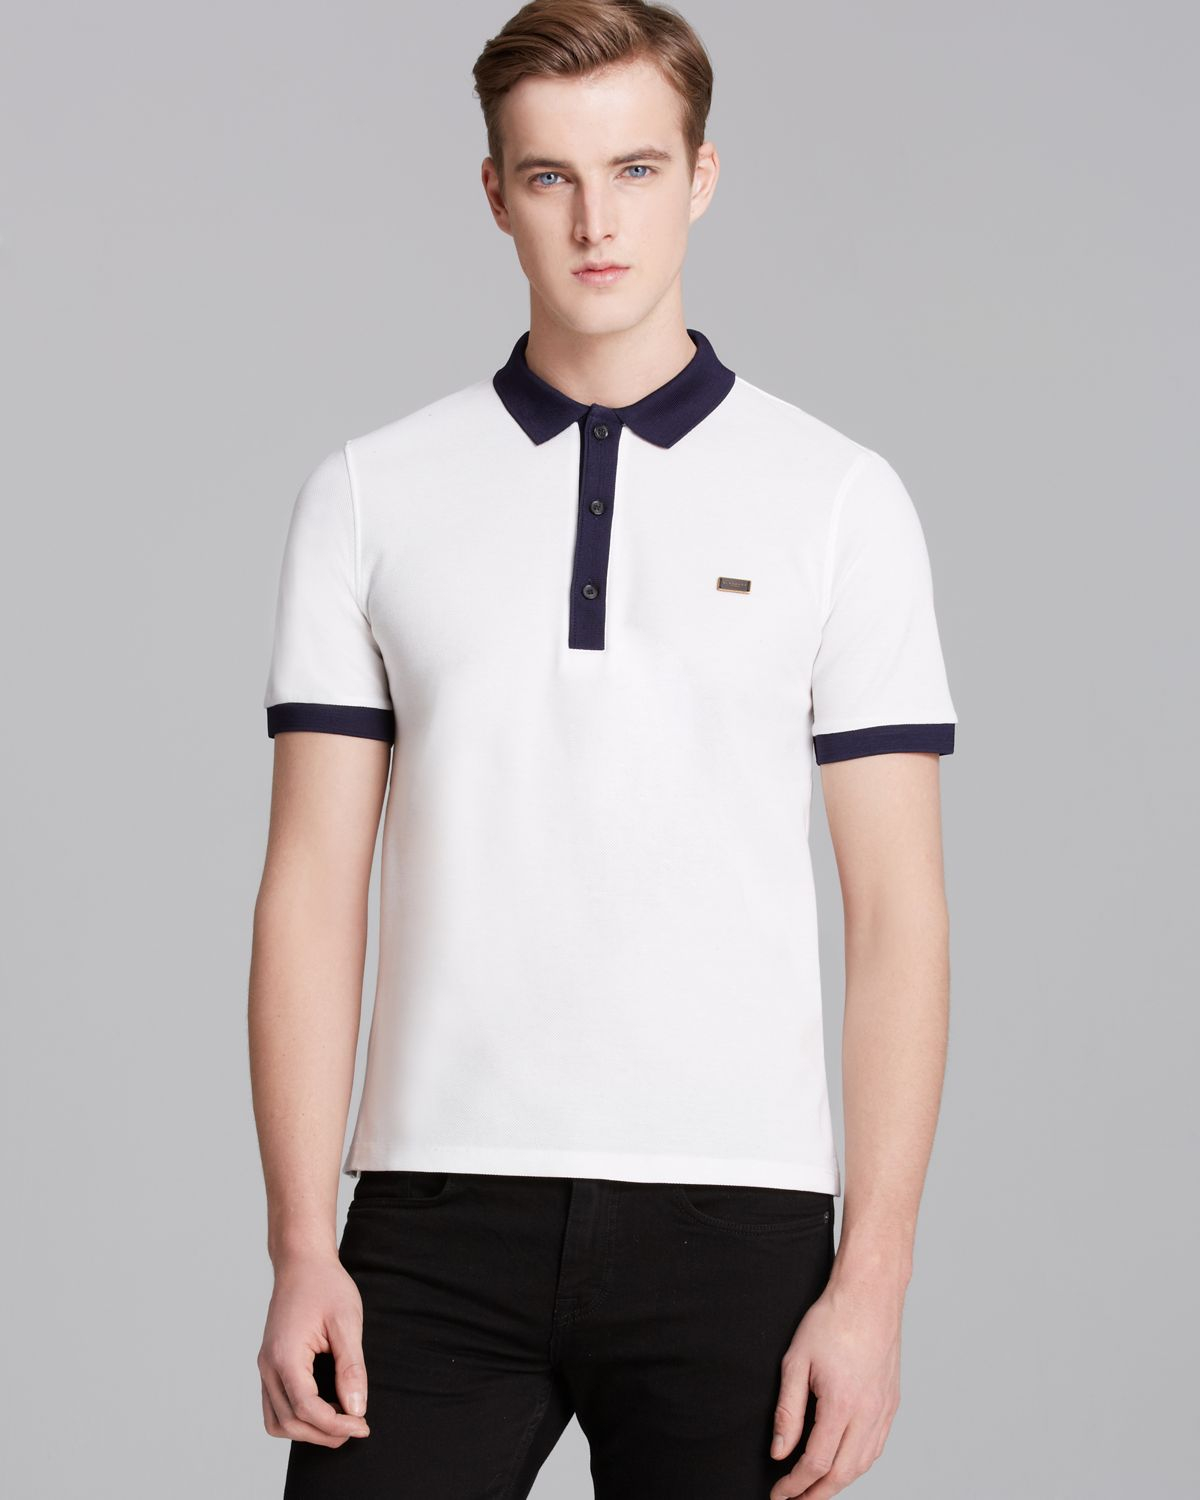 Burberry London Marlowe Polo Shirt in White/Navy (Blue) for Men - Lyst